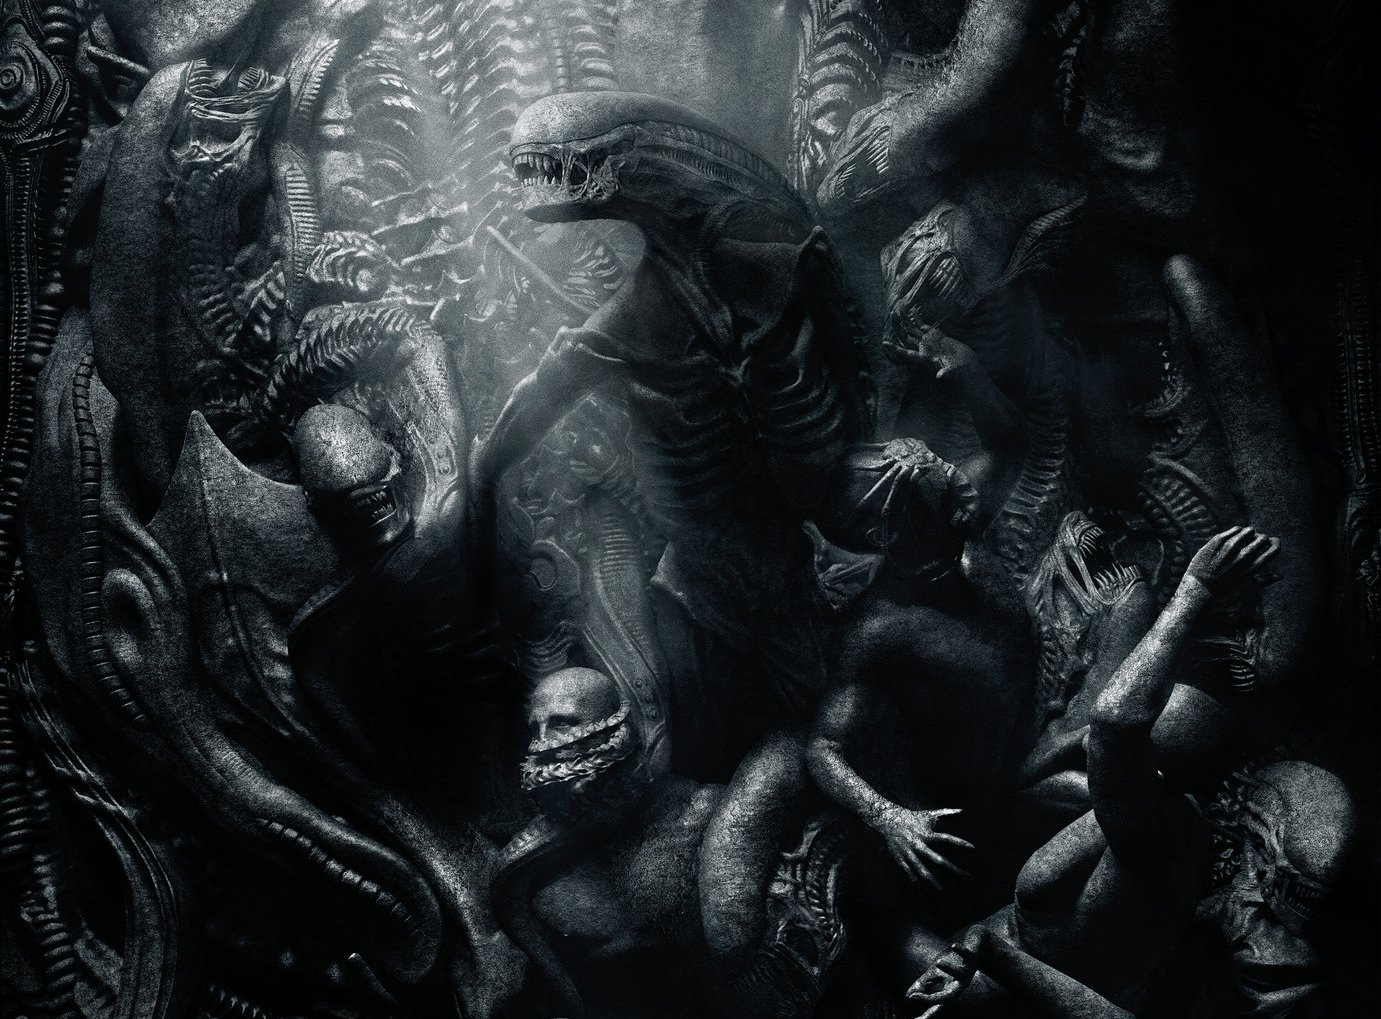 xalien covenant fill.jpg.pagespeed.ic.rPyCbS72Kx